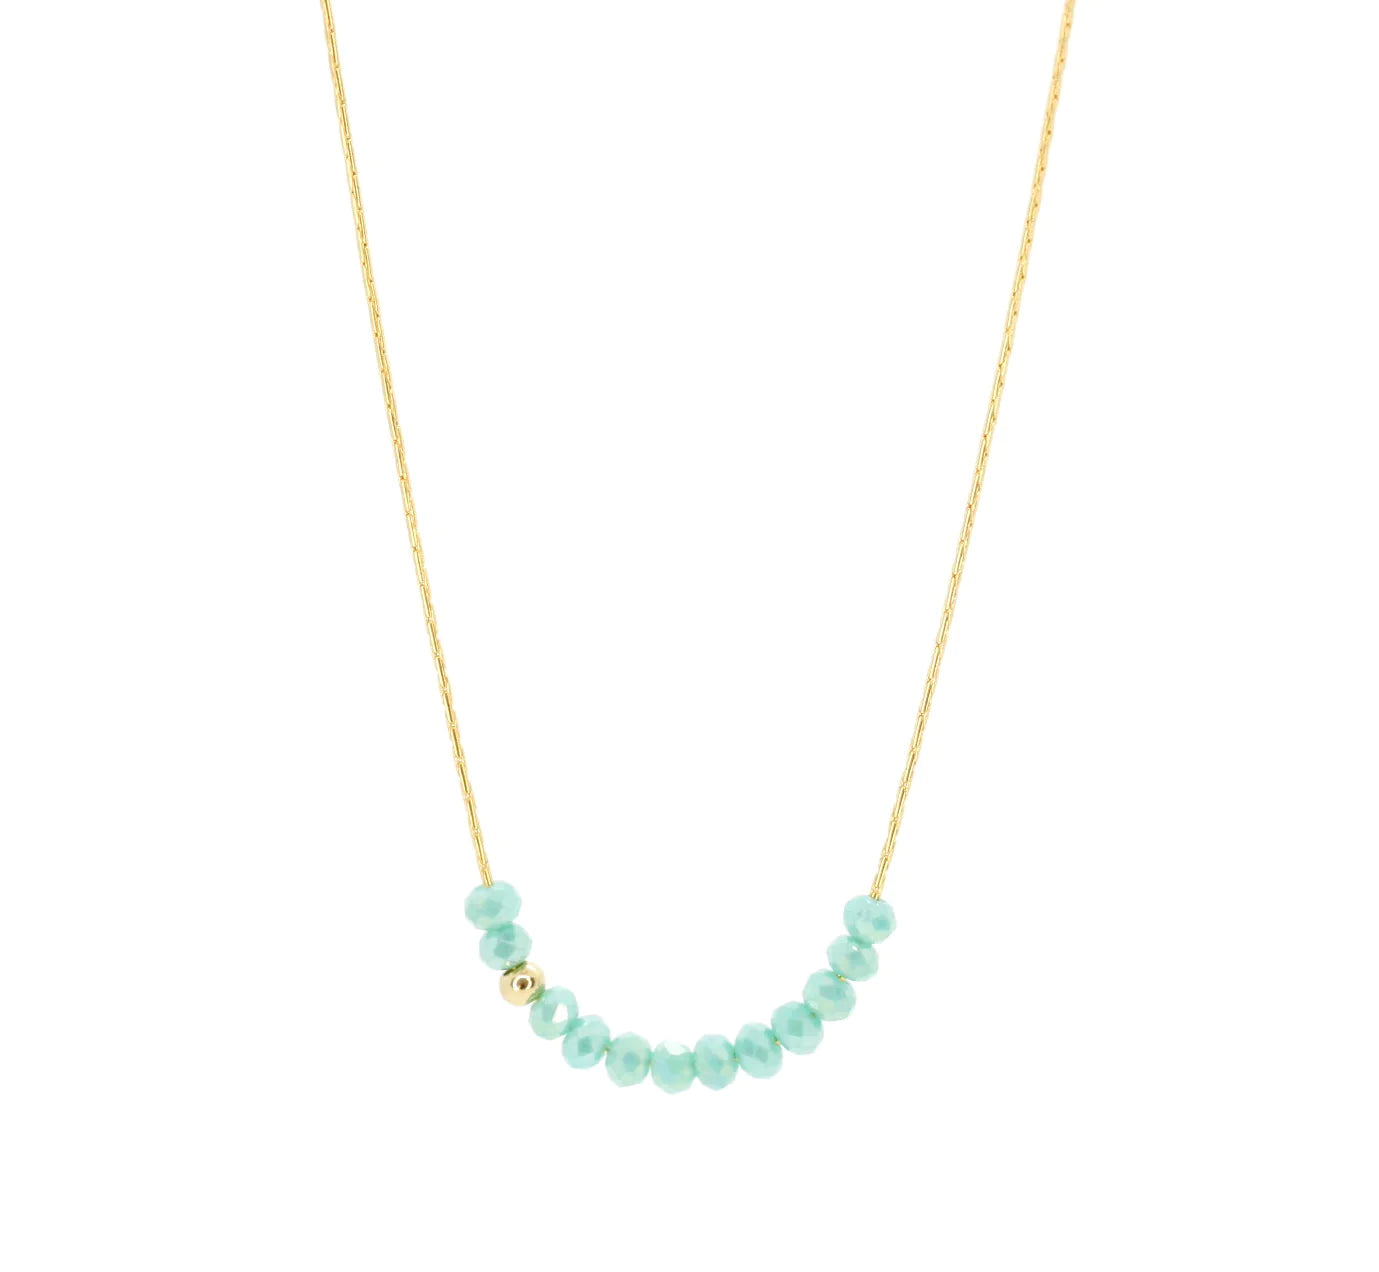 Salty Cali Dainty Necklace Options